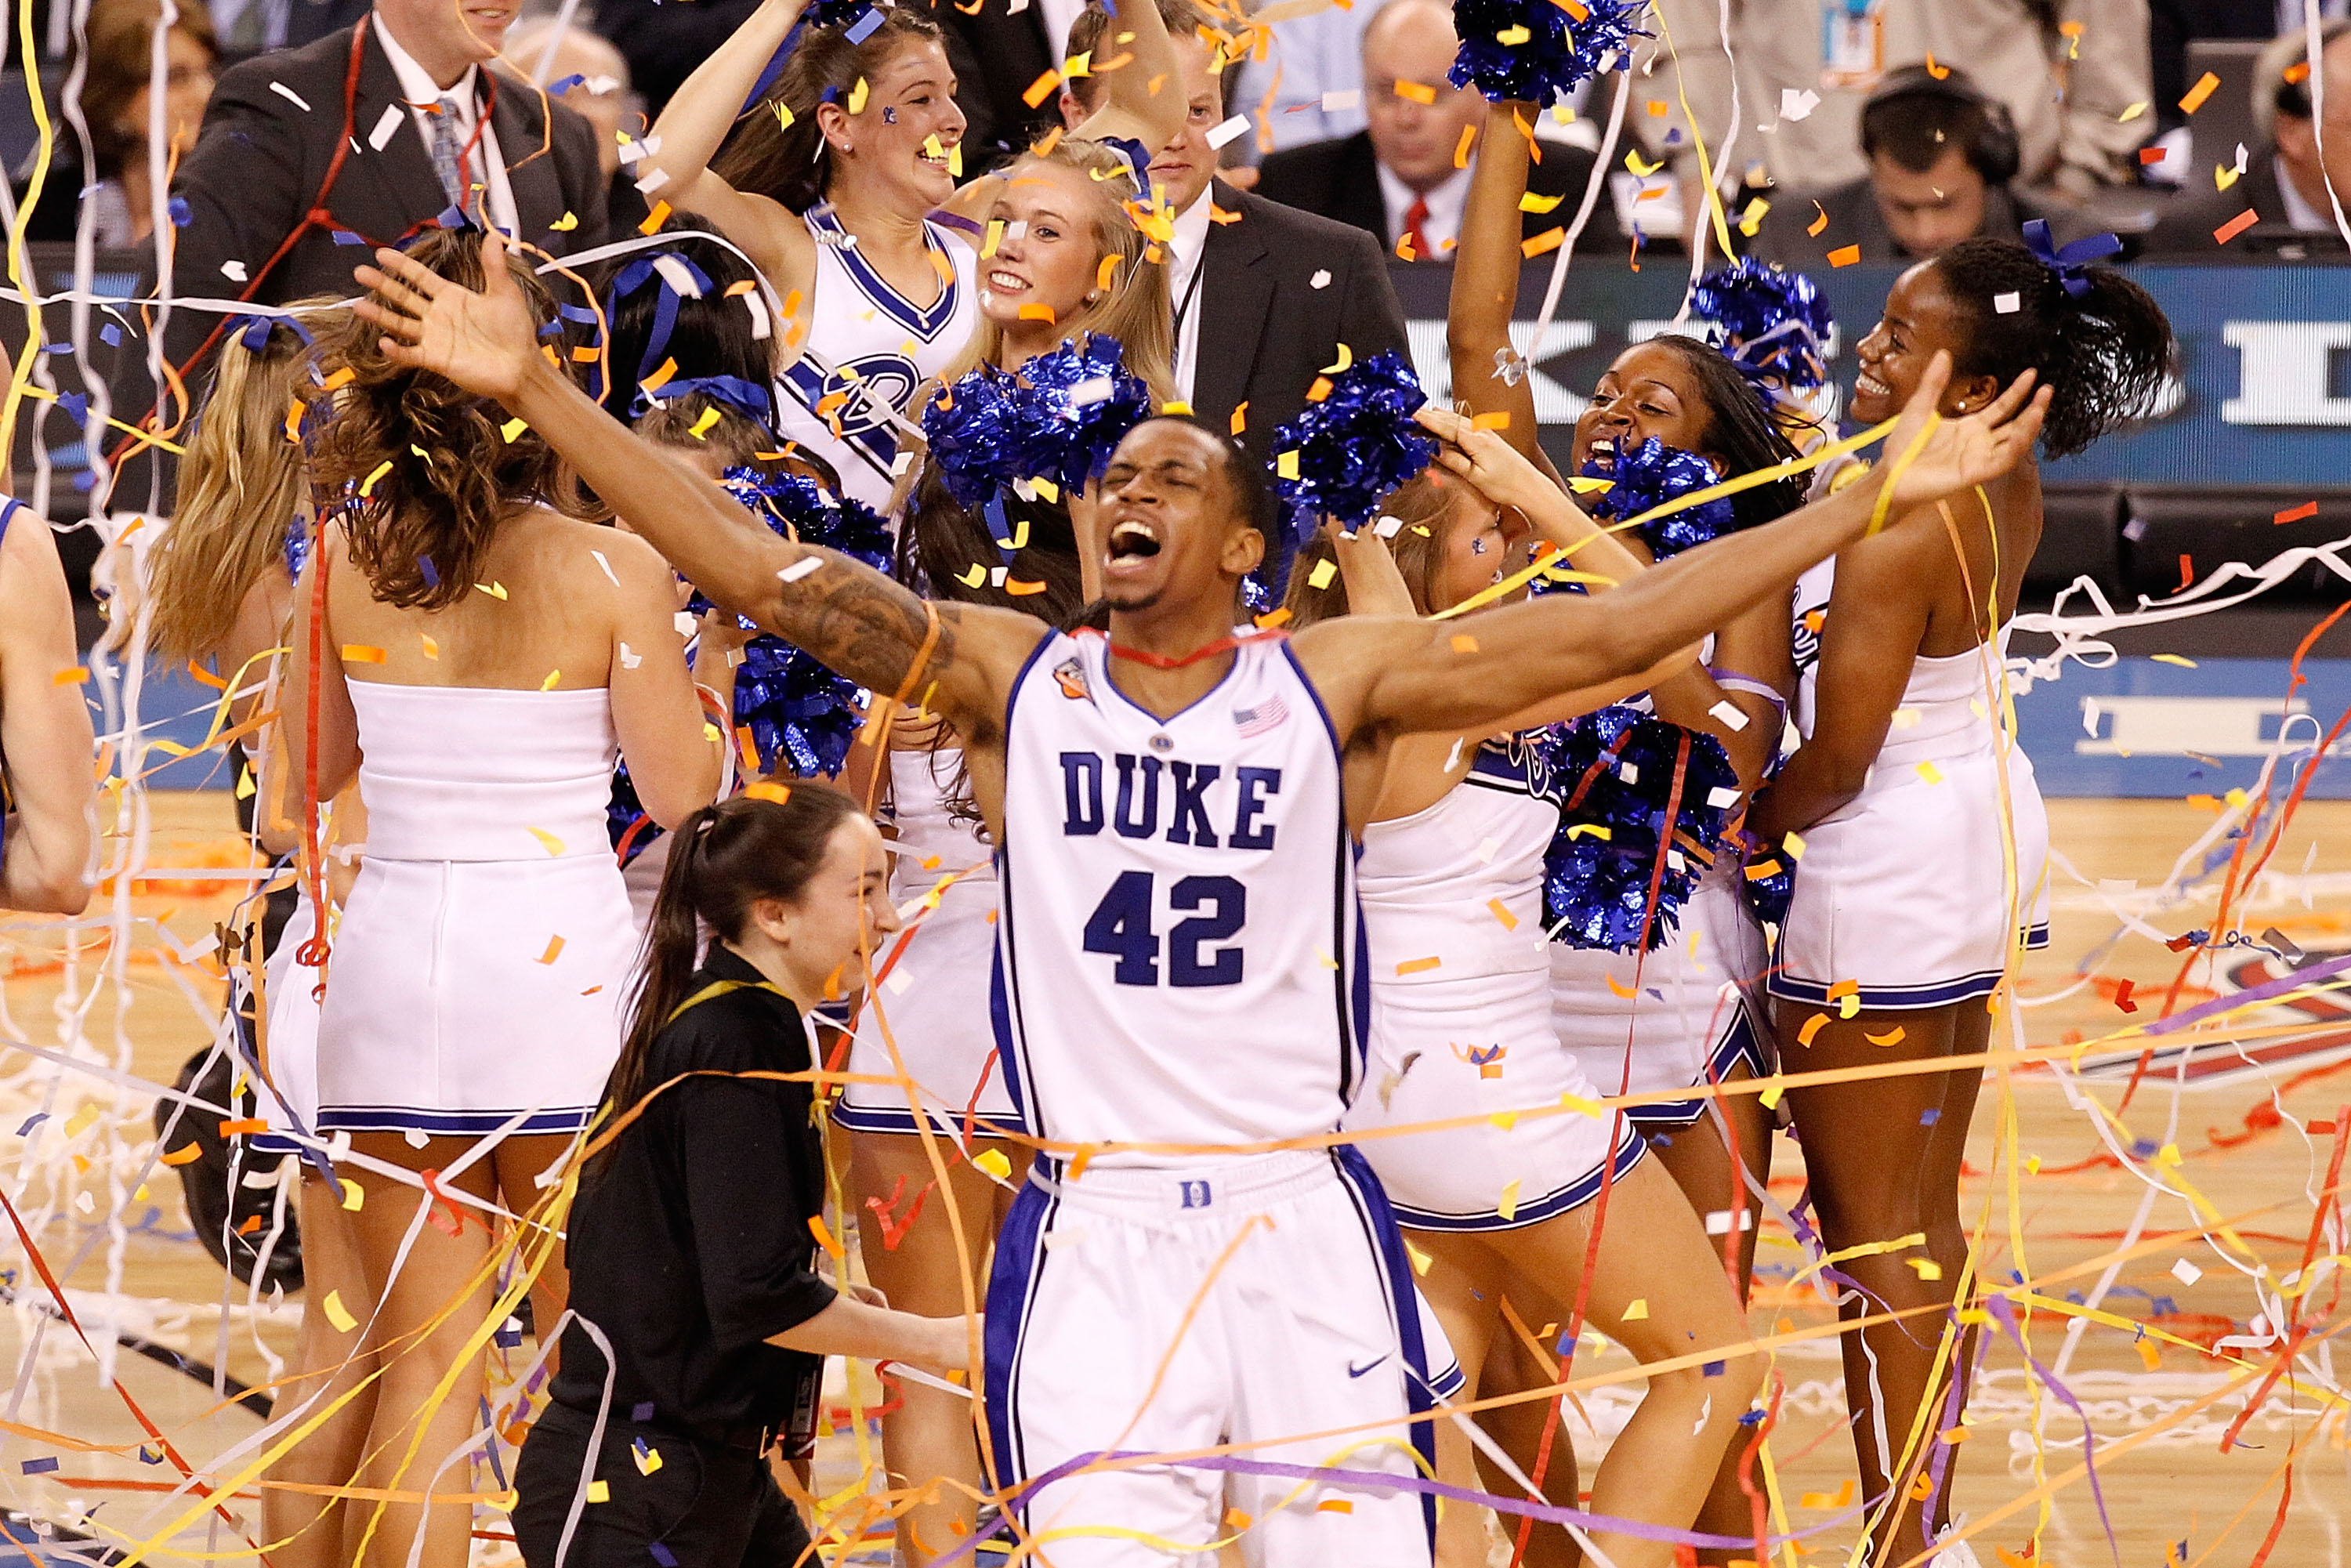 INDIANAPOLIS - APRIL 05: Lance Thomas #42 of the Duke Blue Devils celebrates after the Blue Devils defeat the Butler Bulldogs 61-59 in the 2010 NCAA Division I Men's Basketball National Championship game at Lucas Oil Stadium on April 5, 2010 in Indianapolis, Indiana. (Photo by Kevin C. Cox/Getty Images)